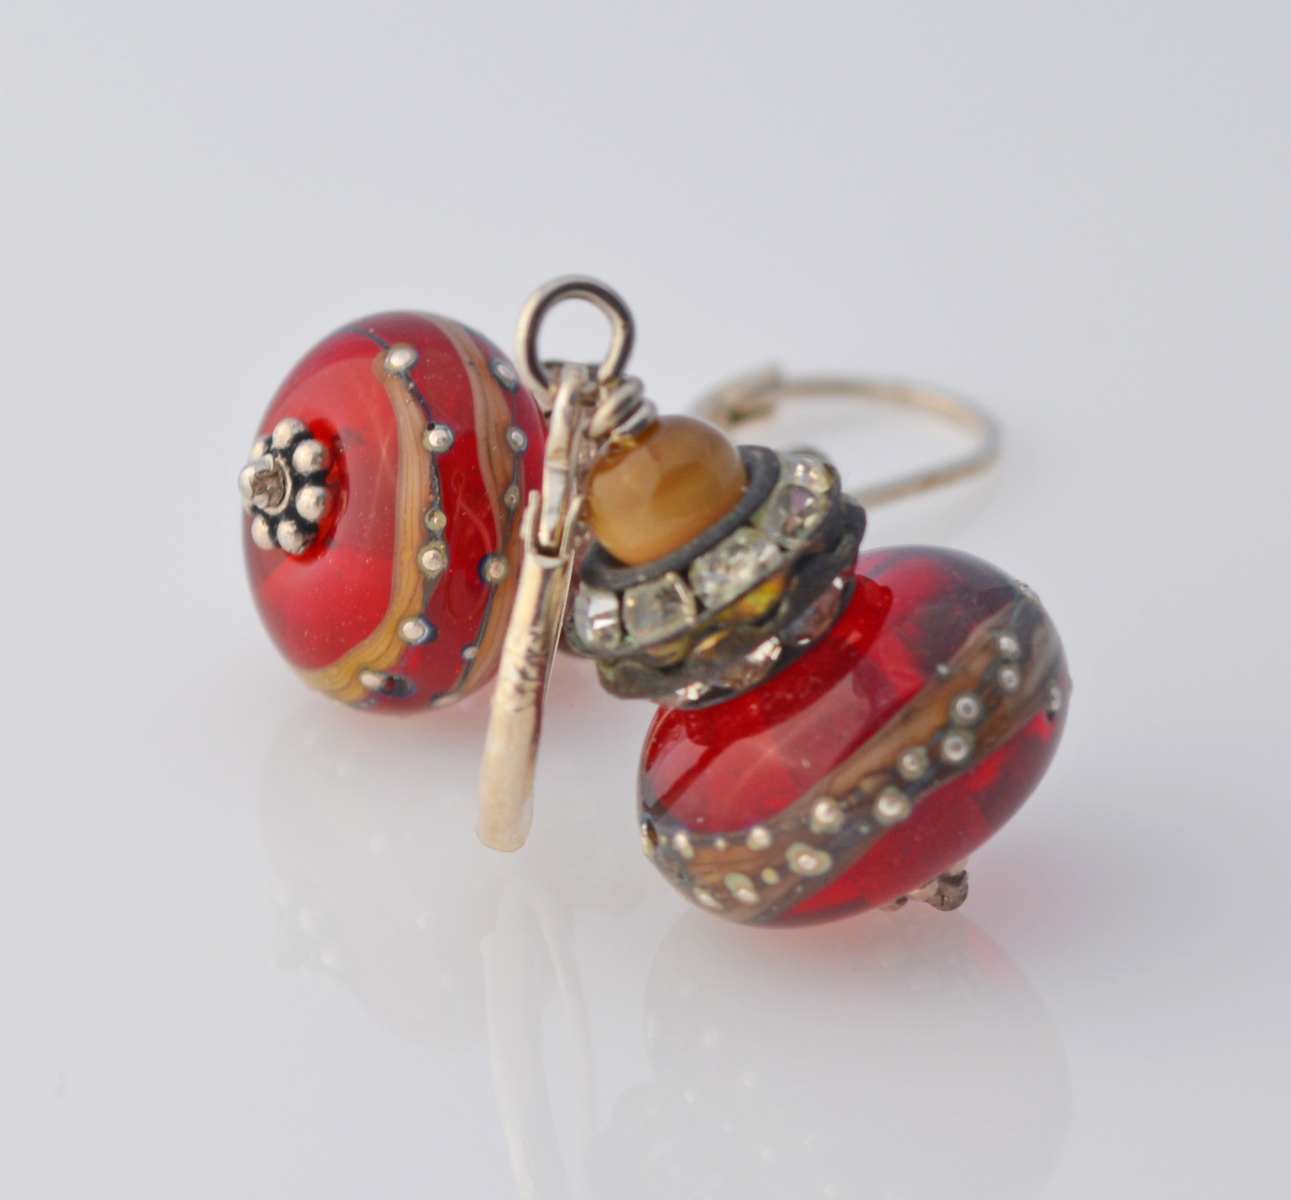 Red Lampwork and vintage crystal earrings by Honey from the Bee